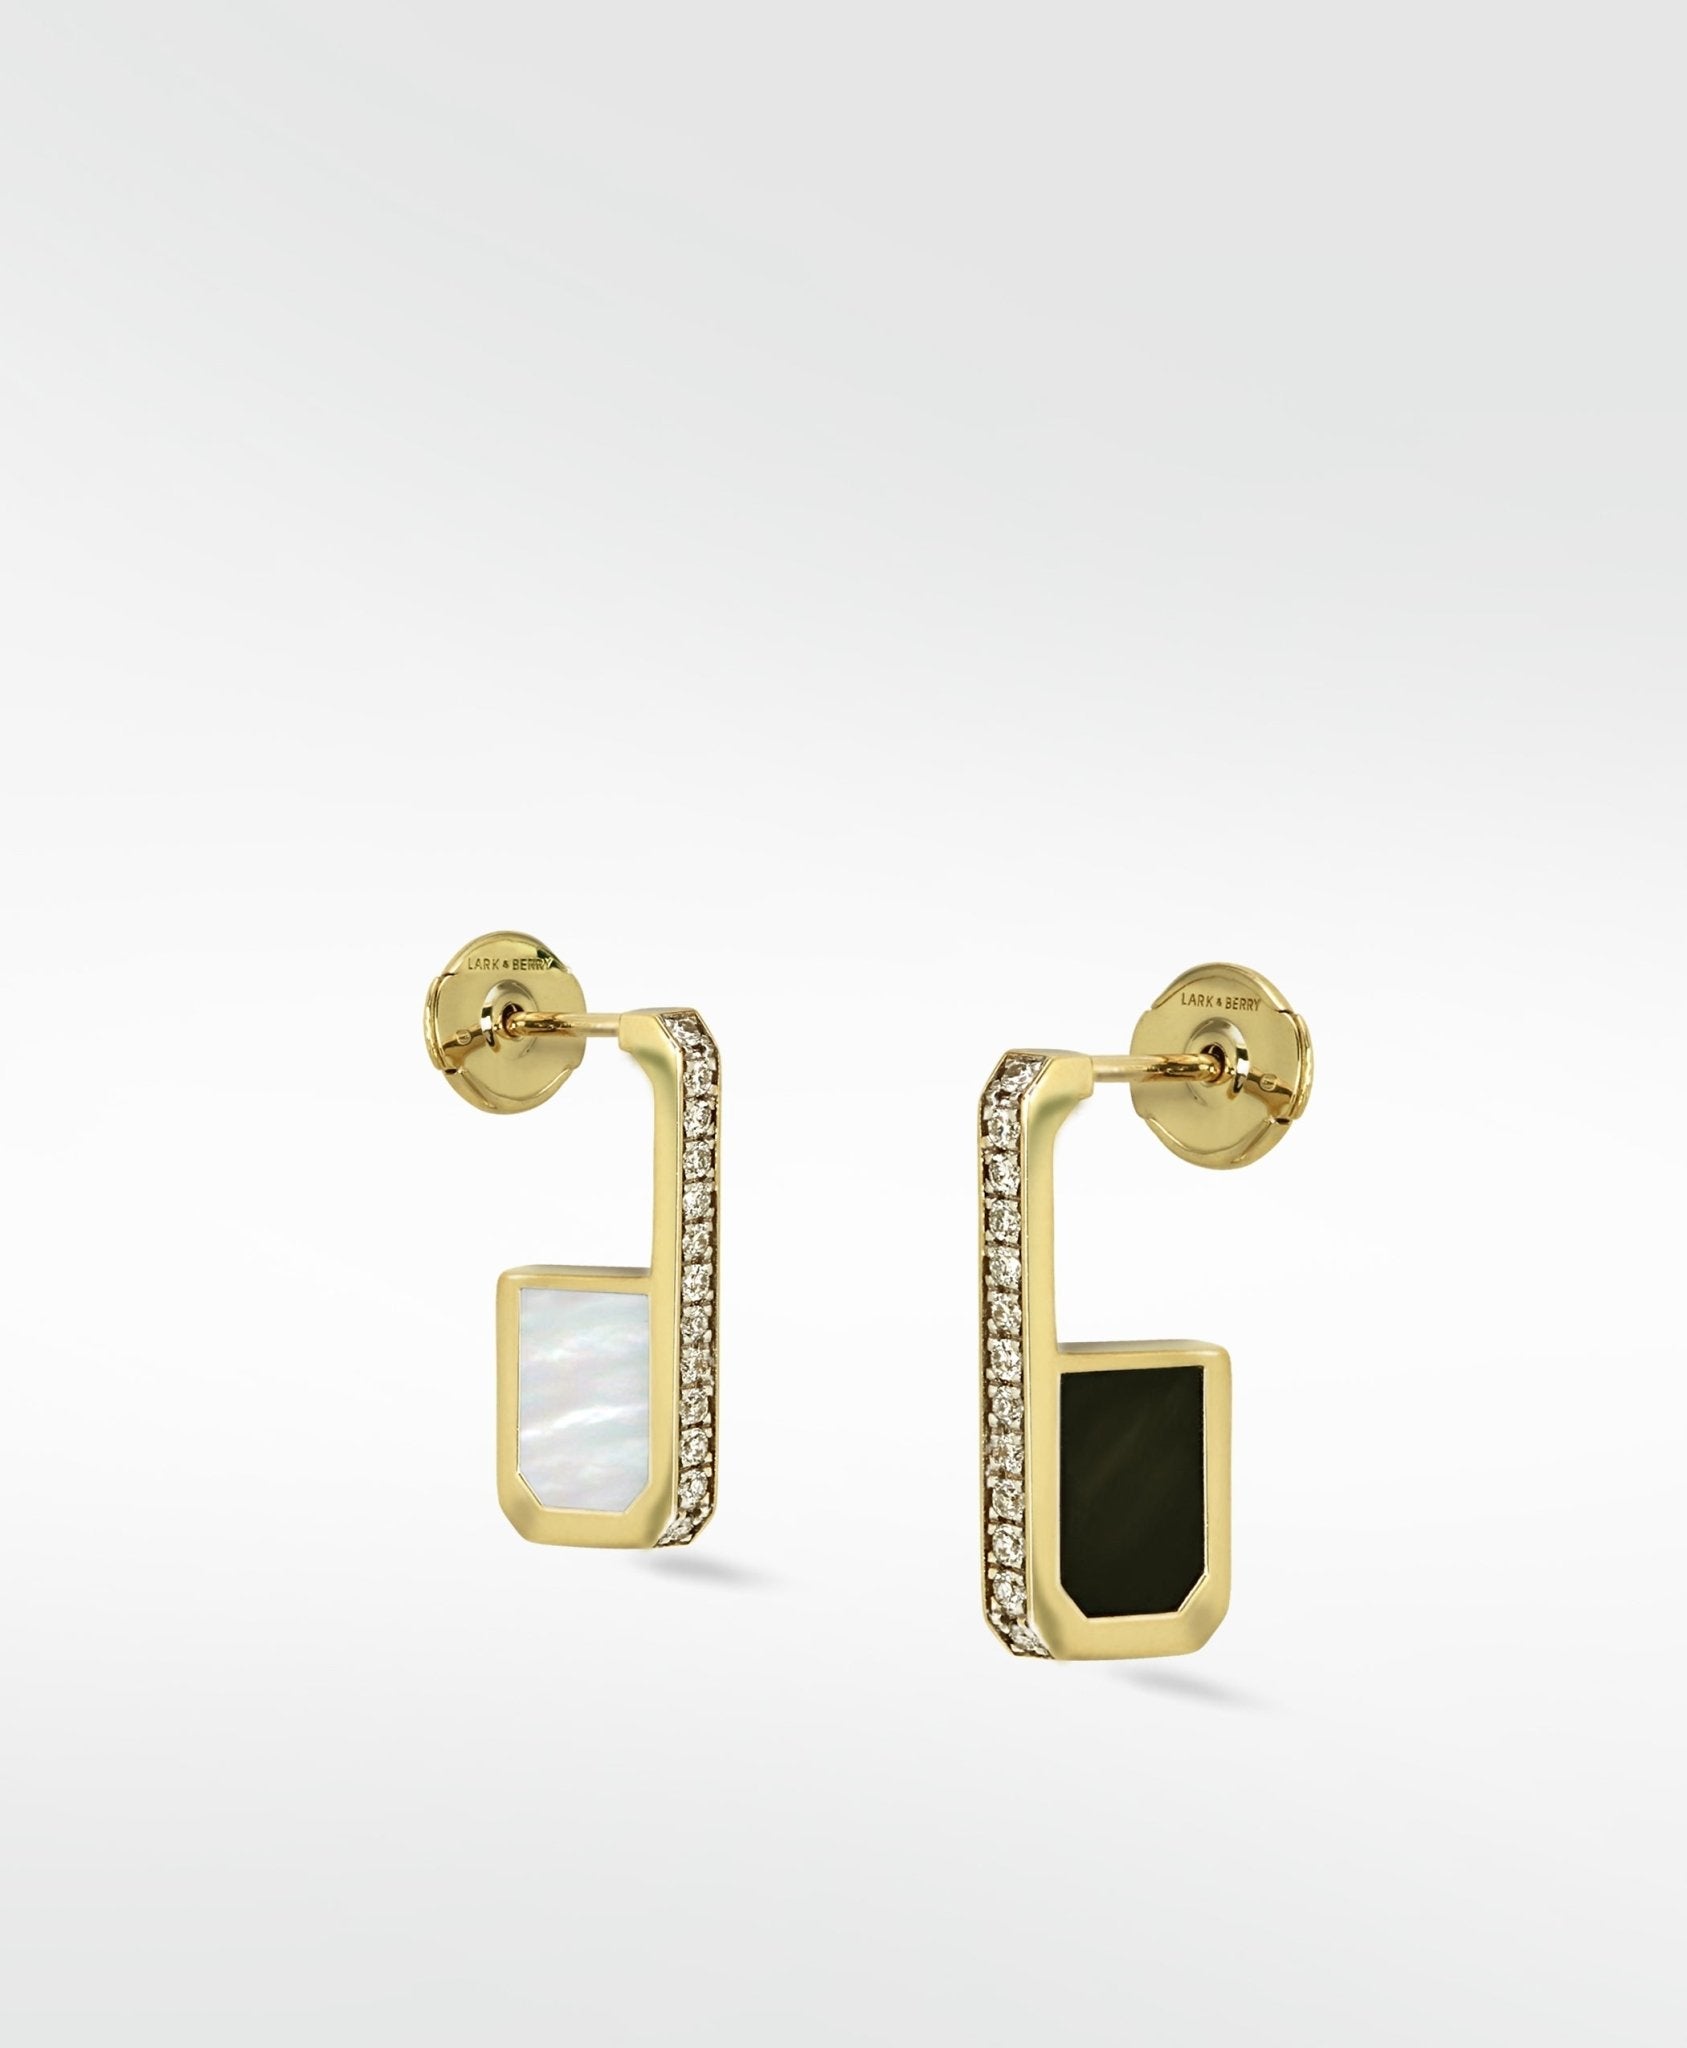 Eclipsis Diamond Hoop Earrings with Mother of Pearl and Onyx in 18k Yellow Gold - Lark and Berry